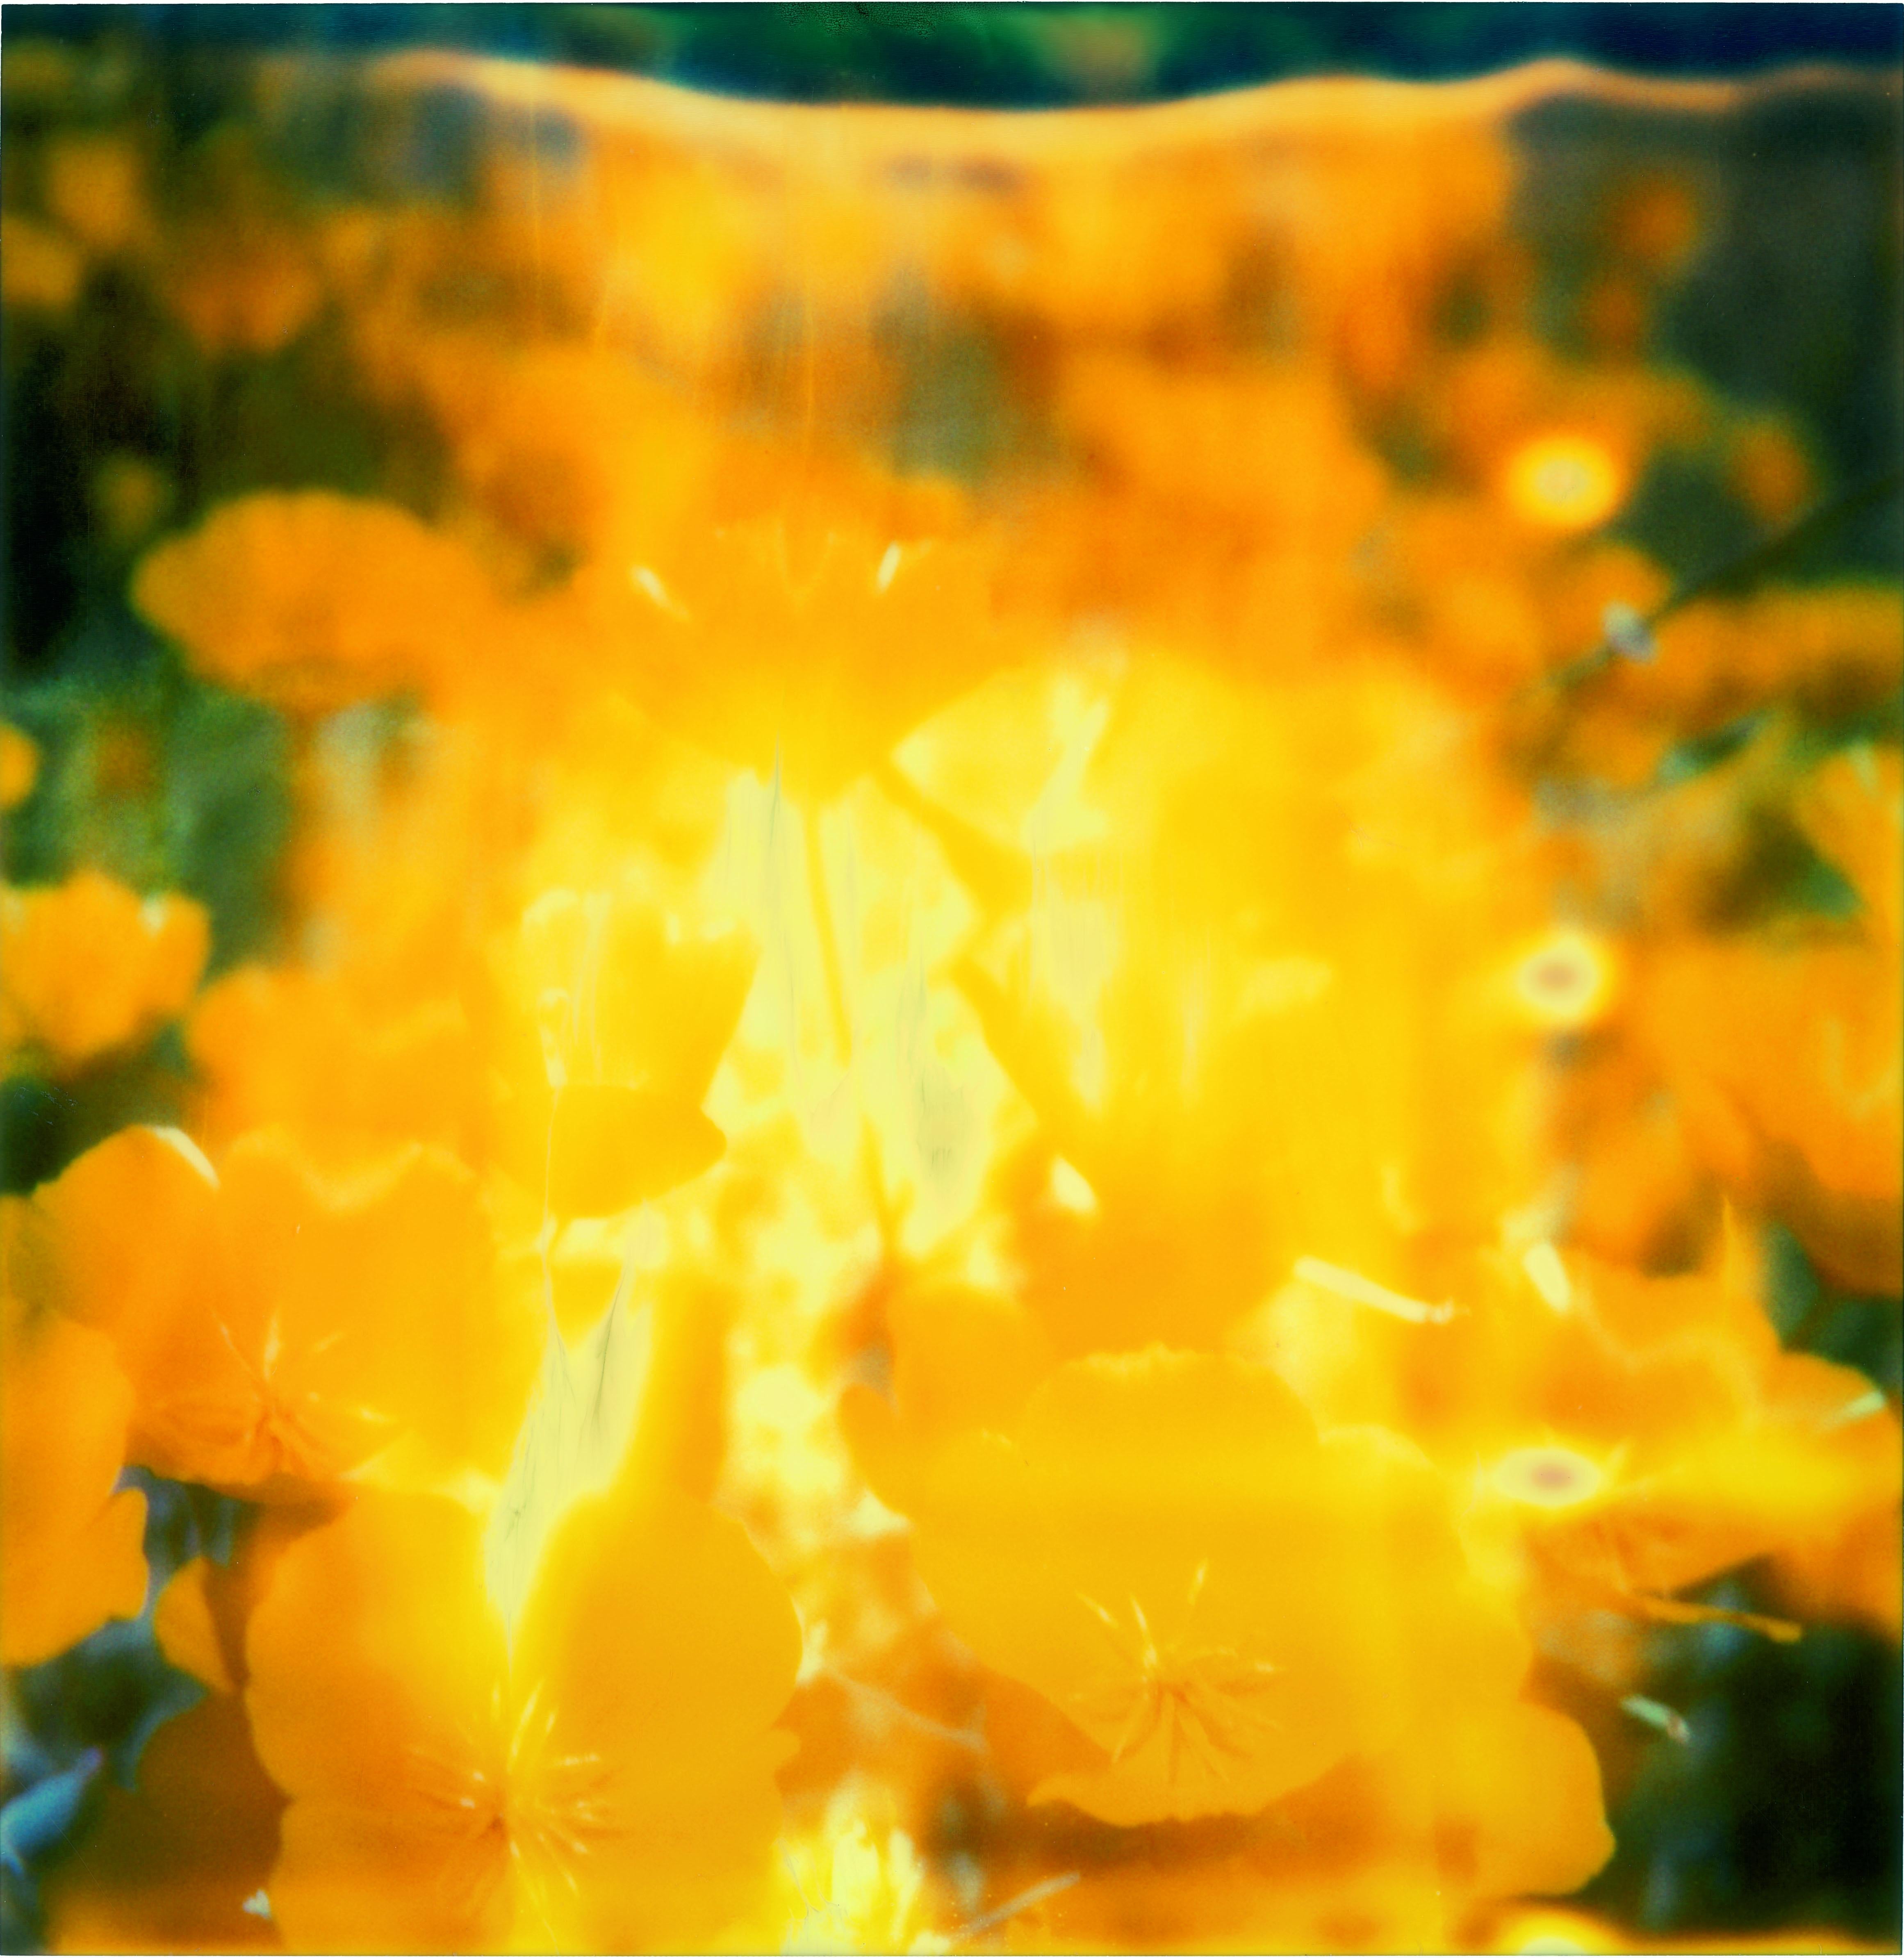 Stefanie Schneider Abstract Photograph - Yellow Flower  - The Last Picture Show, analog, 128x126cm, mounted